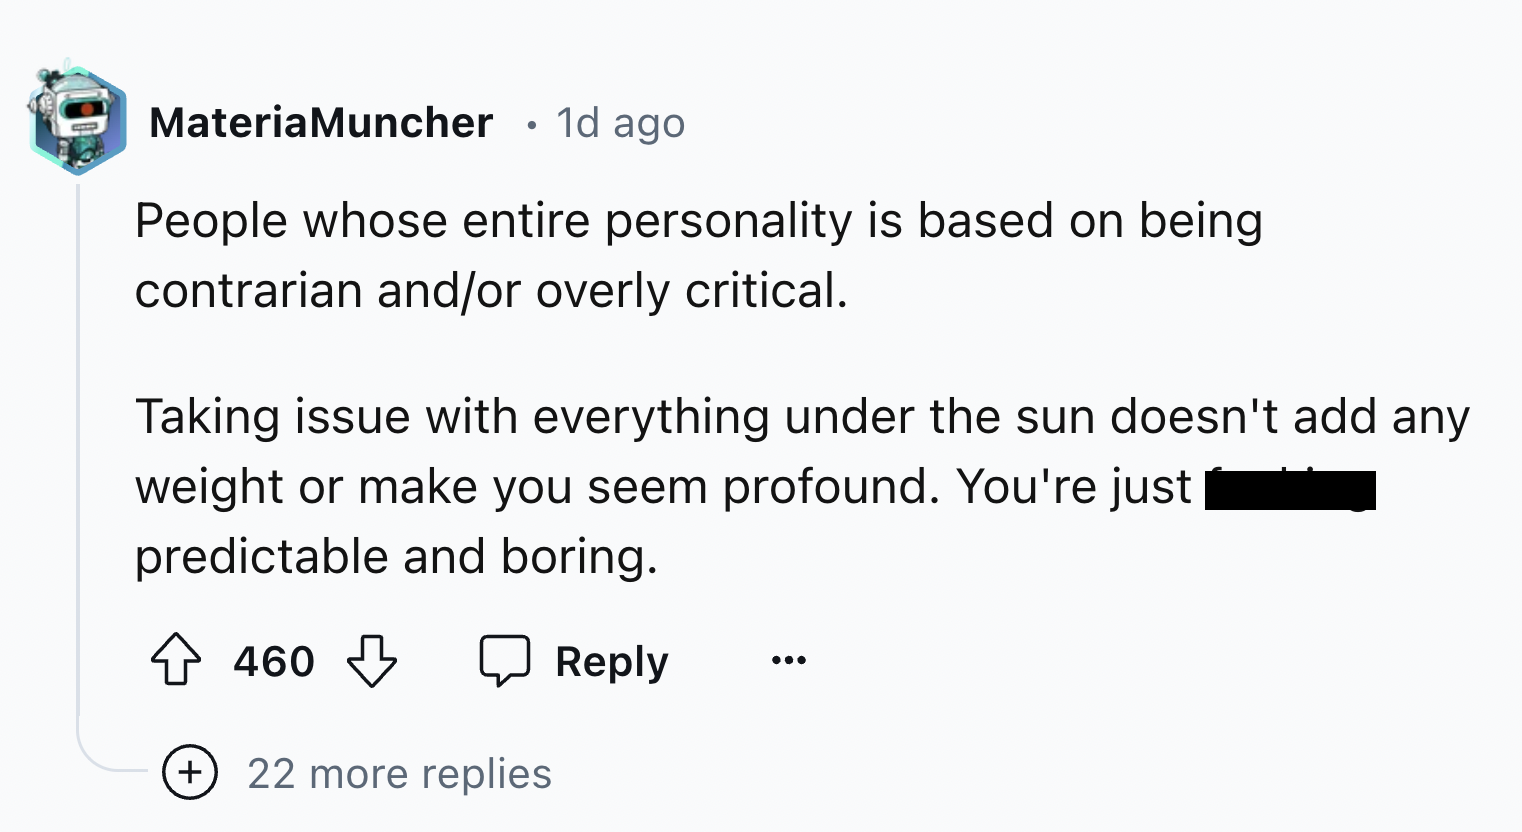 screenshot - Materia Muncher 1d ago People whose entire personality is based on being contrarian andor overly critical. Taking issue with everything under the sun doesn't add any weight or make you seem profound. You're just predictable and boring. 460 22